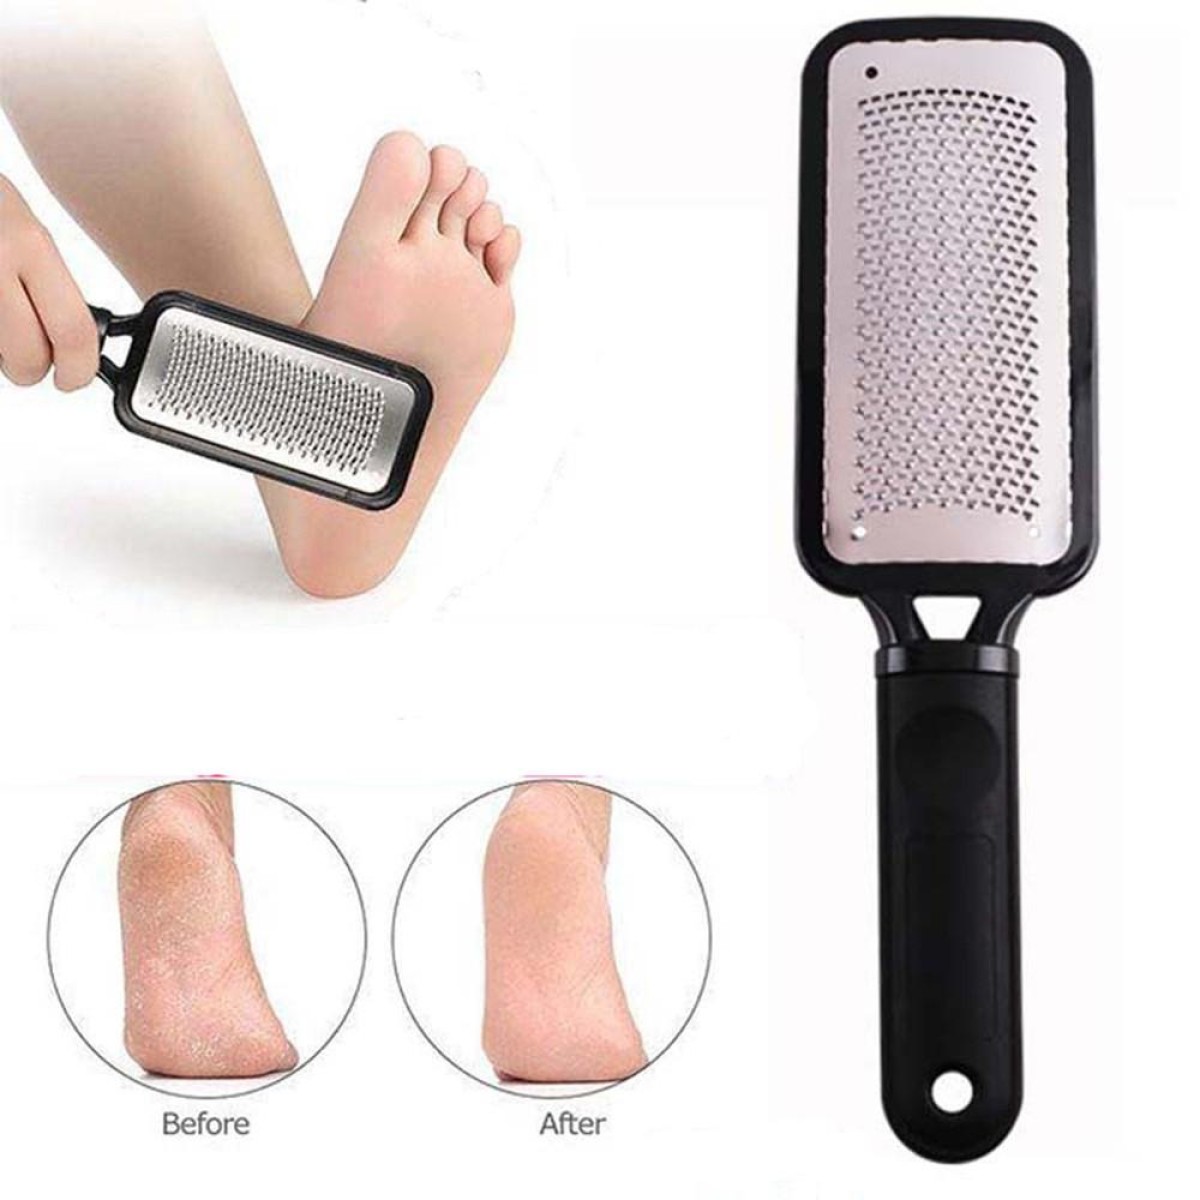 Stainless Steel Foot Pedicure Callus Remover Hard Dead Skin Scrubber